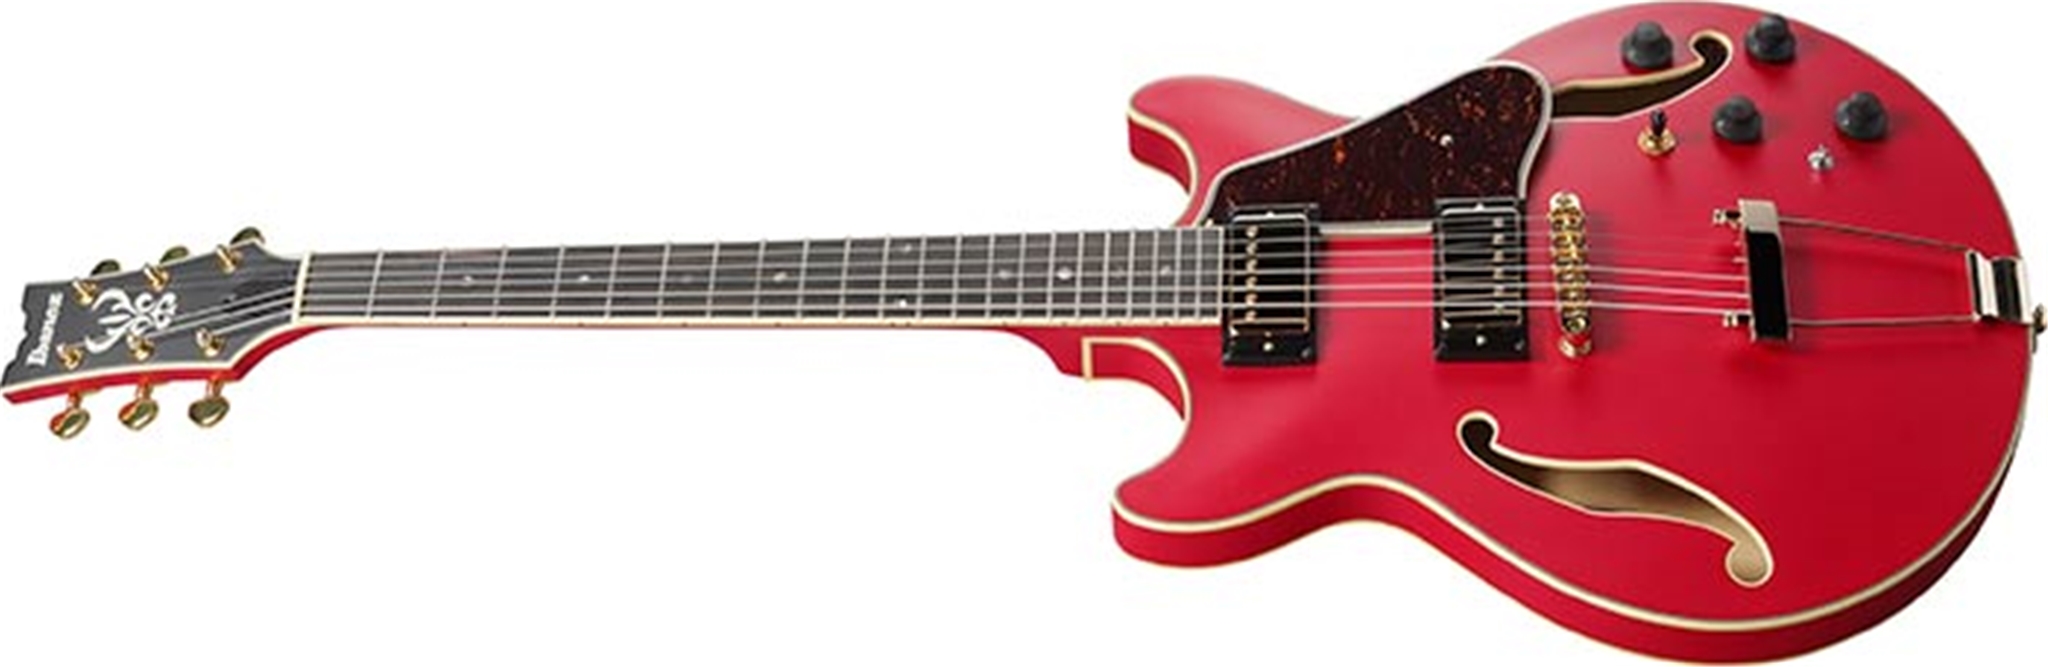  IBANEZ AMH90 Cherry Red Flat 6-String Electric Guitar  